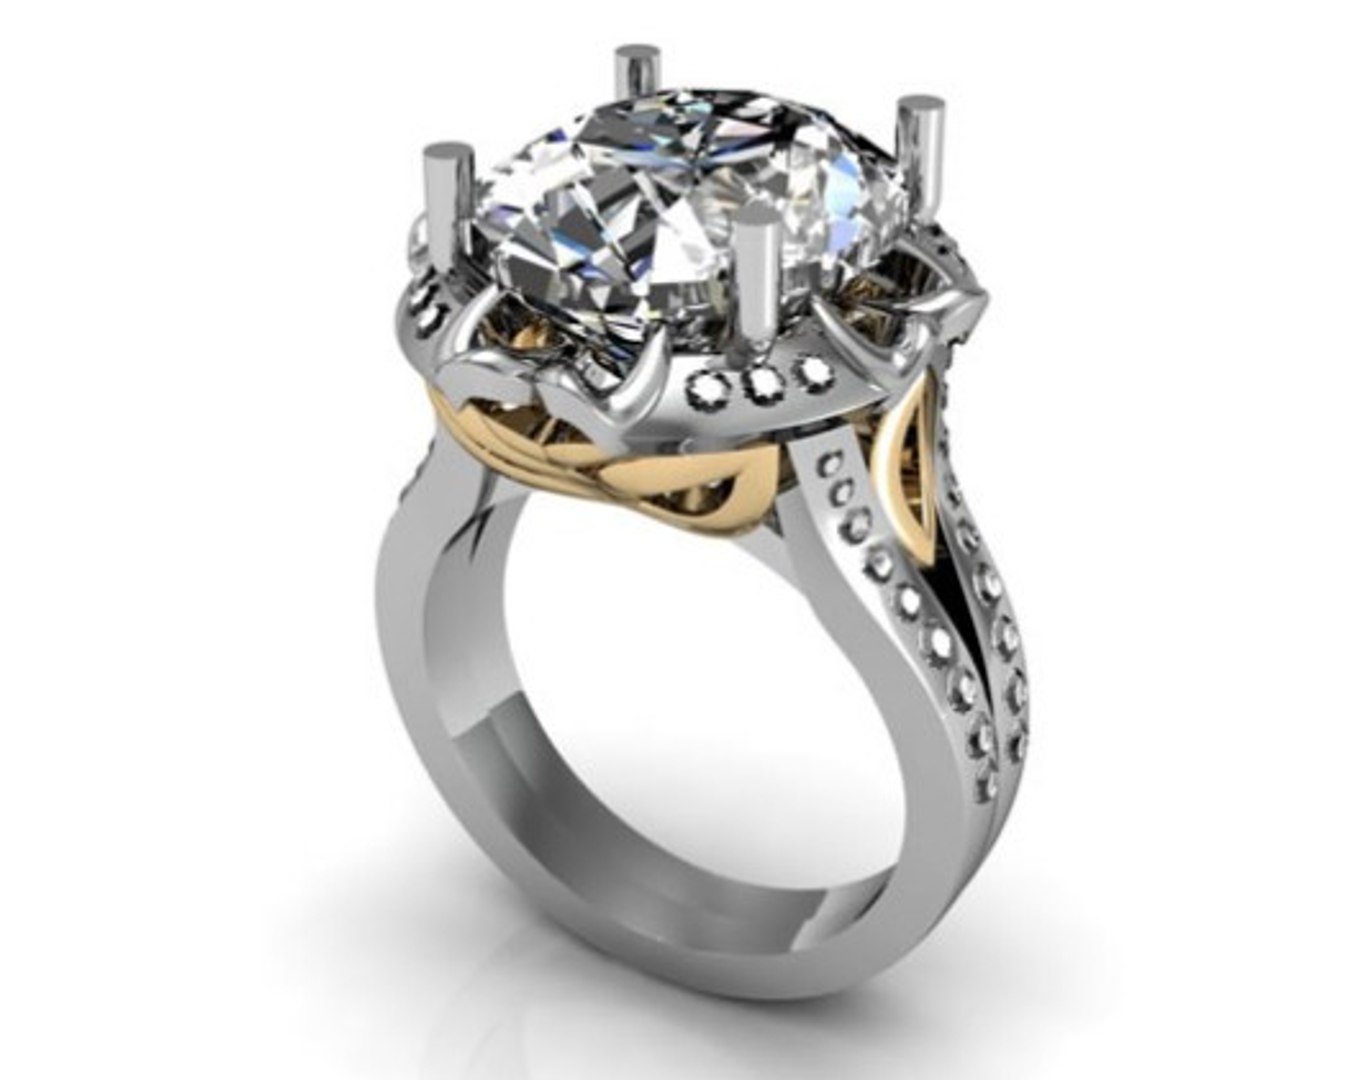 ArtStation - Engagement Ring With Round Stones